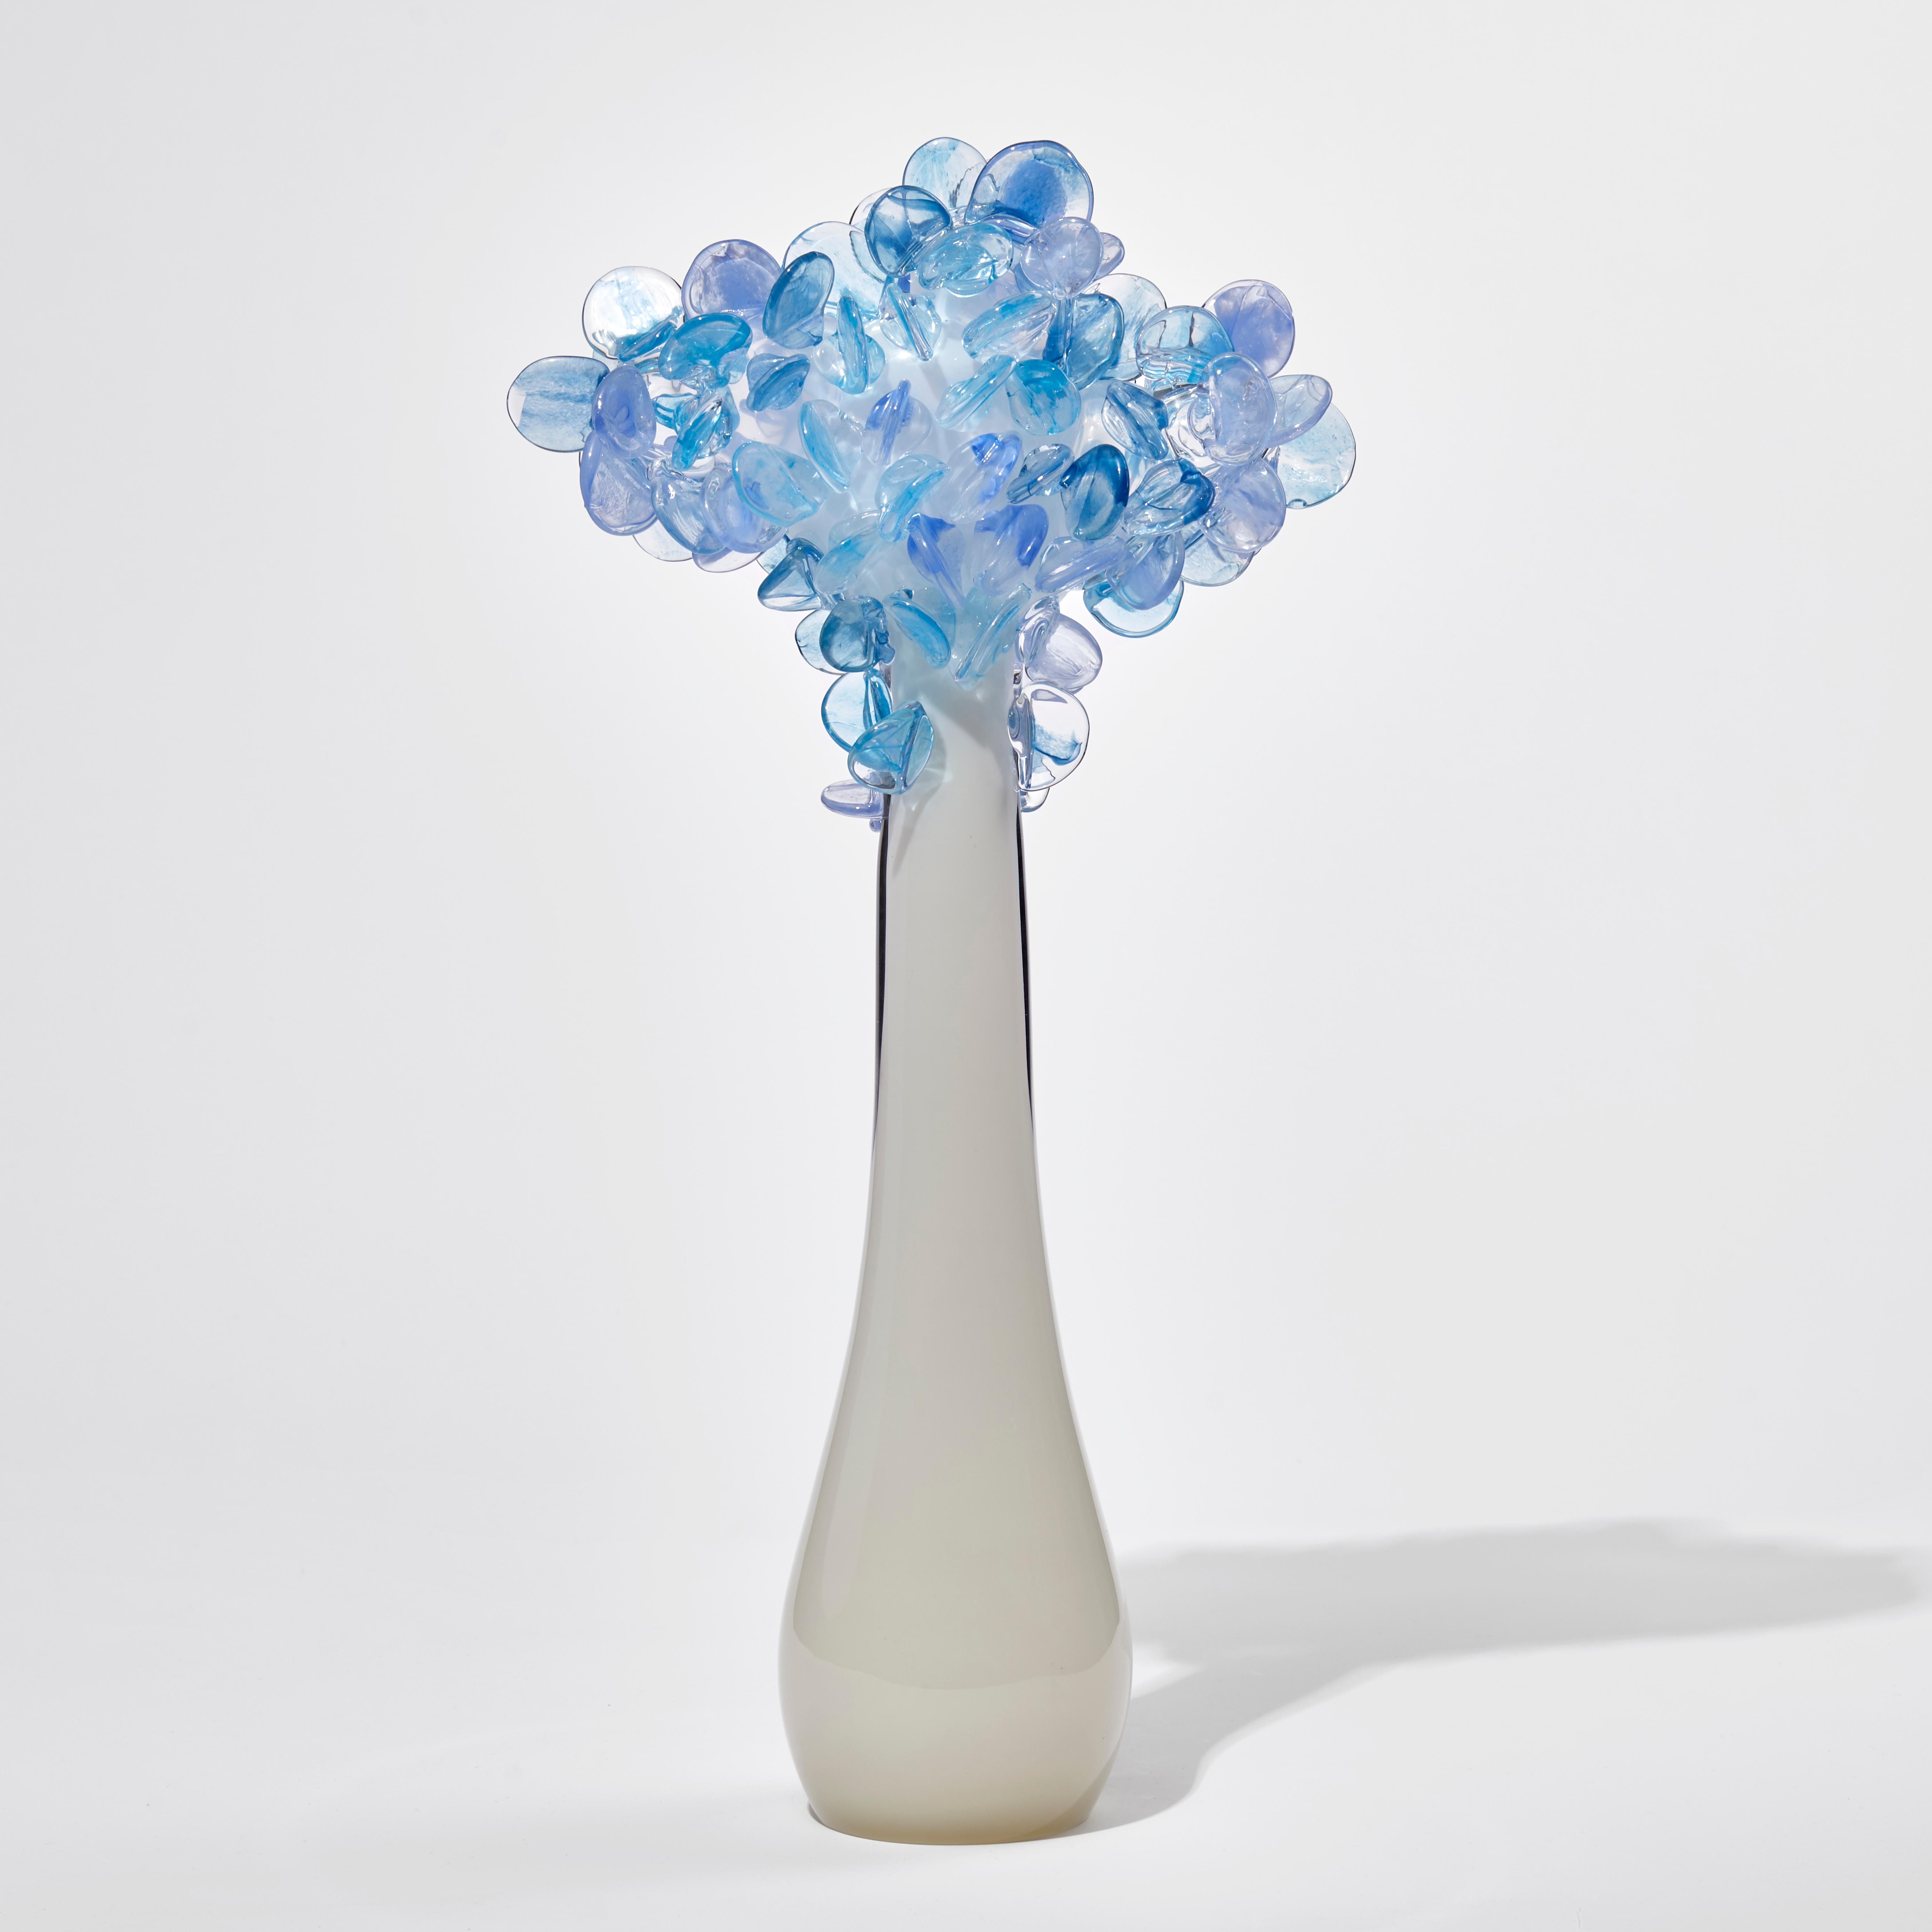 British Enchanted Dawn in Blue, a Unique Glass Tree Sculpture by Louis Thompson